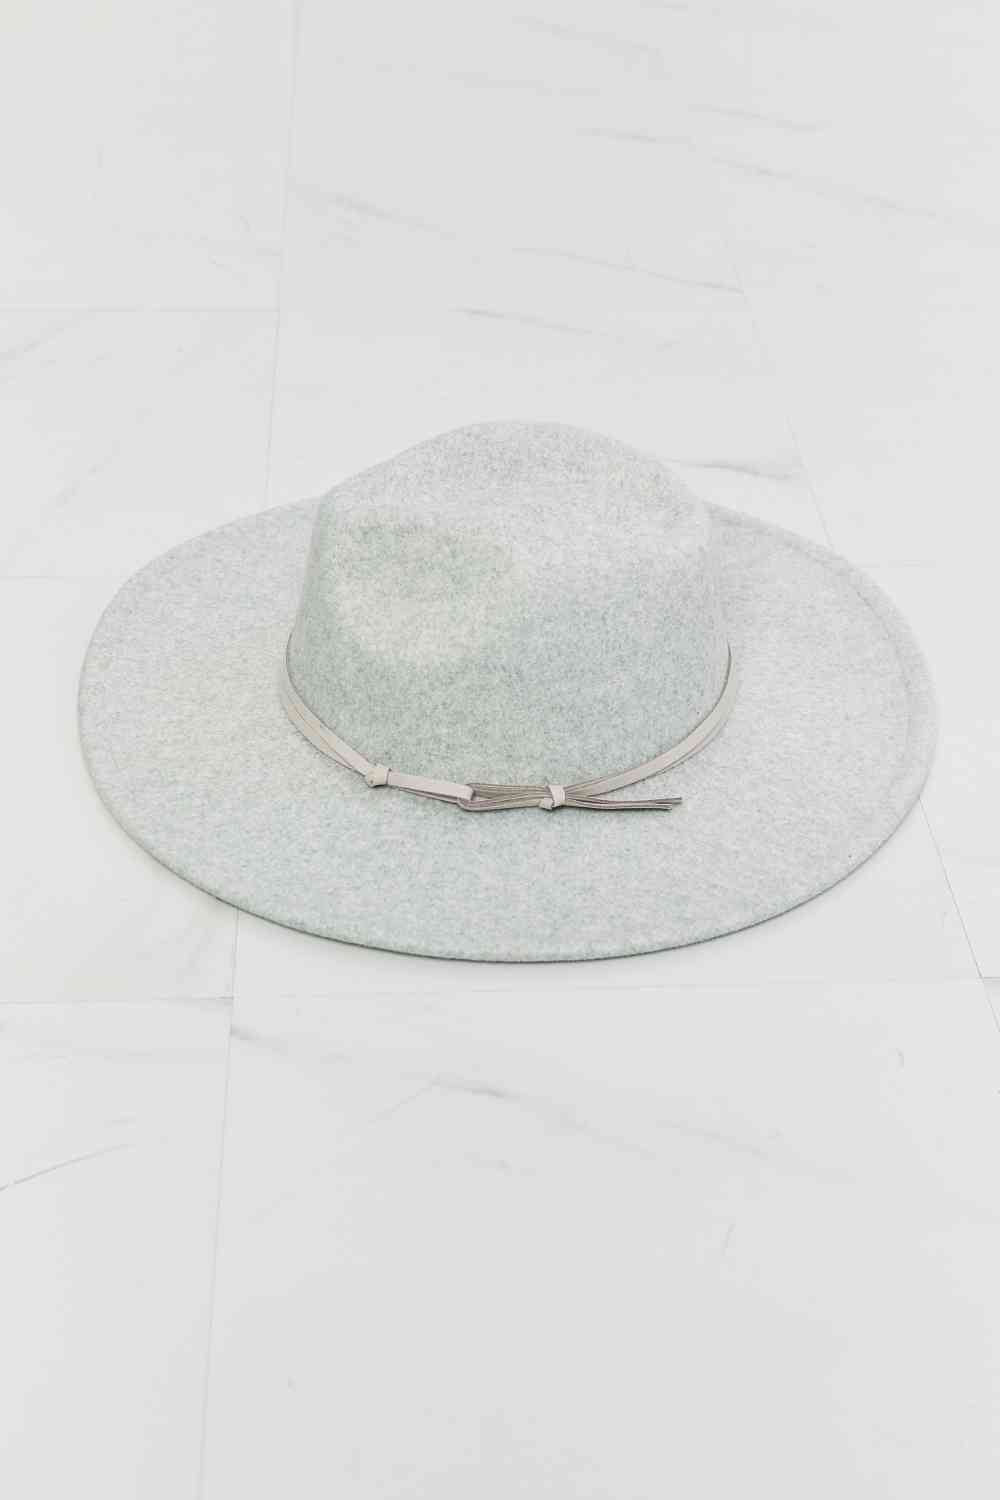 Festival Babe Fedora Hat - Kawaii Stop - Adjustable Straps, Comfortable Wear, Elegance, Fame Accessories, Faux Leather Detailing, Neutral Color, Polyester Blend, Ship from USA, Stylish Fedora Hat, Timeless Style, Versatile Fashion